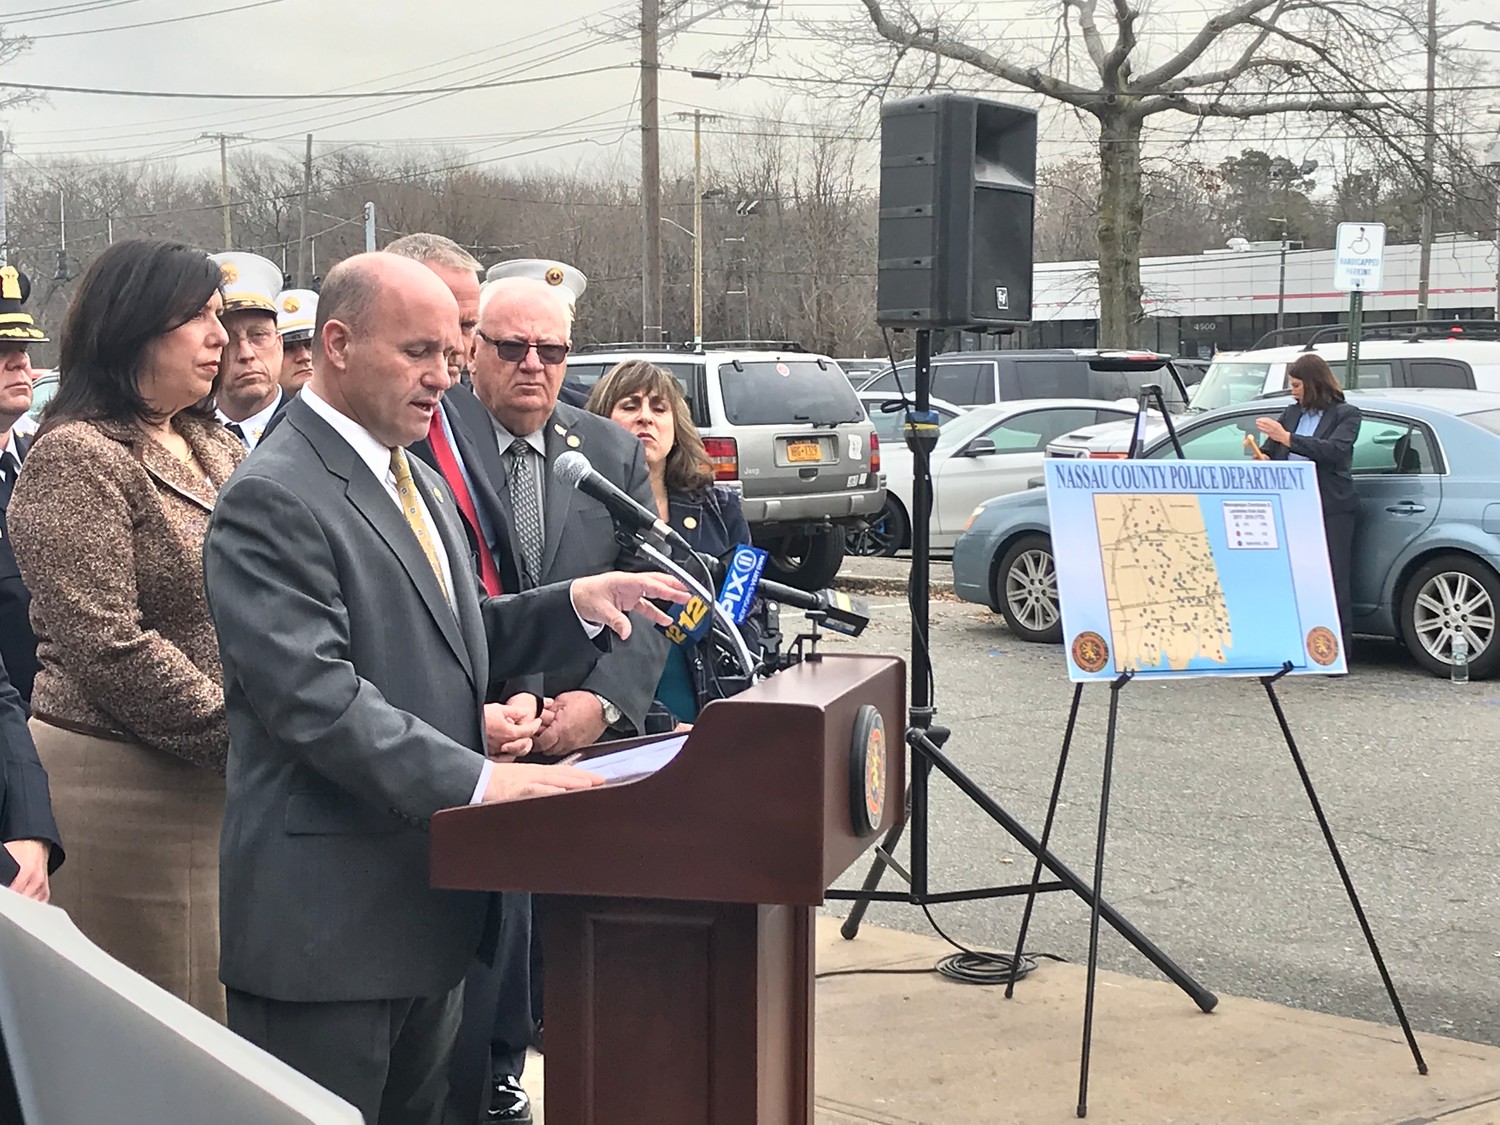 Nassau County Police Commissioner Patrick Ryder identified Massapequa as the department’s first identified opioid overdose “hot spot” through their OD Maps software. Nassau County District Attorney Madeline Singas and Nassau County Executive Laura Curran, as well as NCPD officers and administrators joined Ryder at the March 1 news conference.